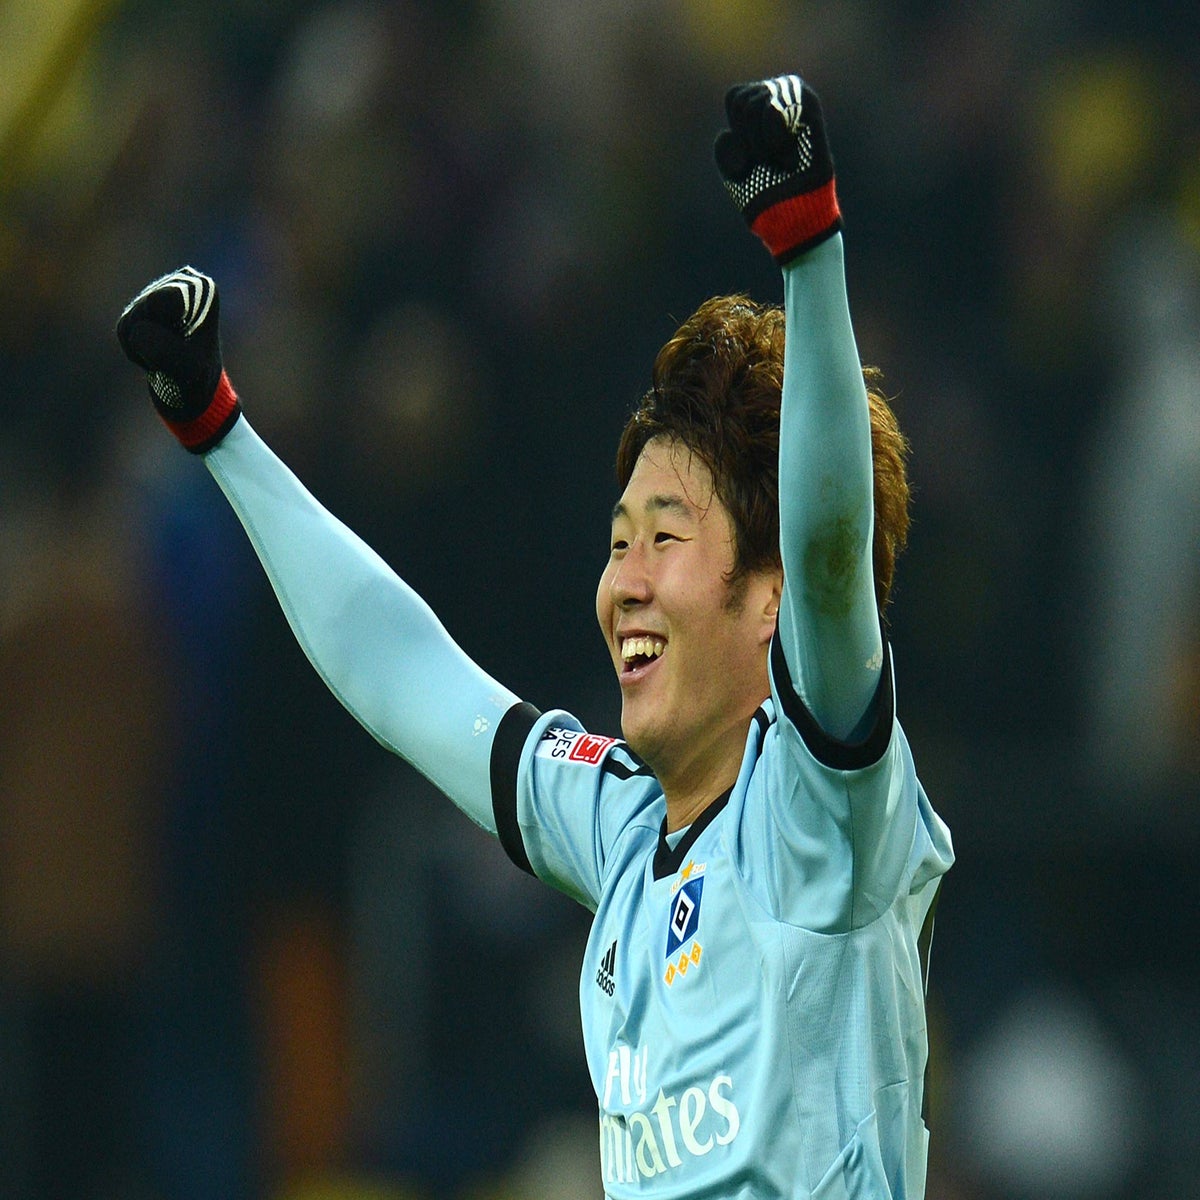 Tottenham confident Son Heung-min will sign new contract as negotiations  continue